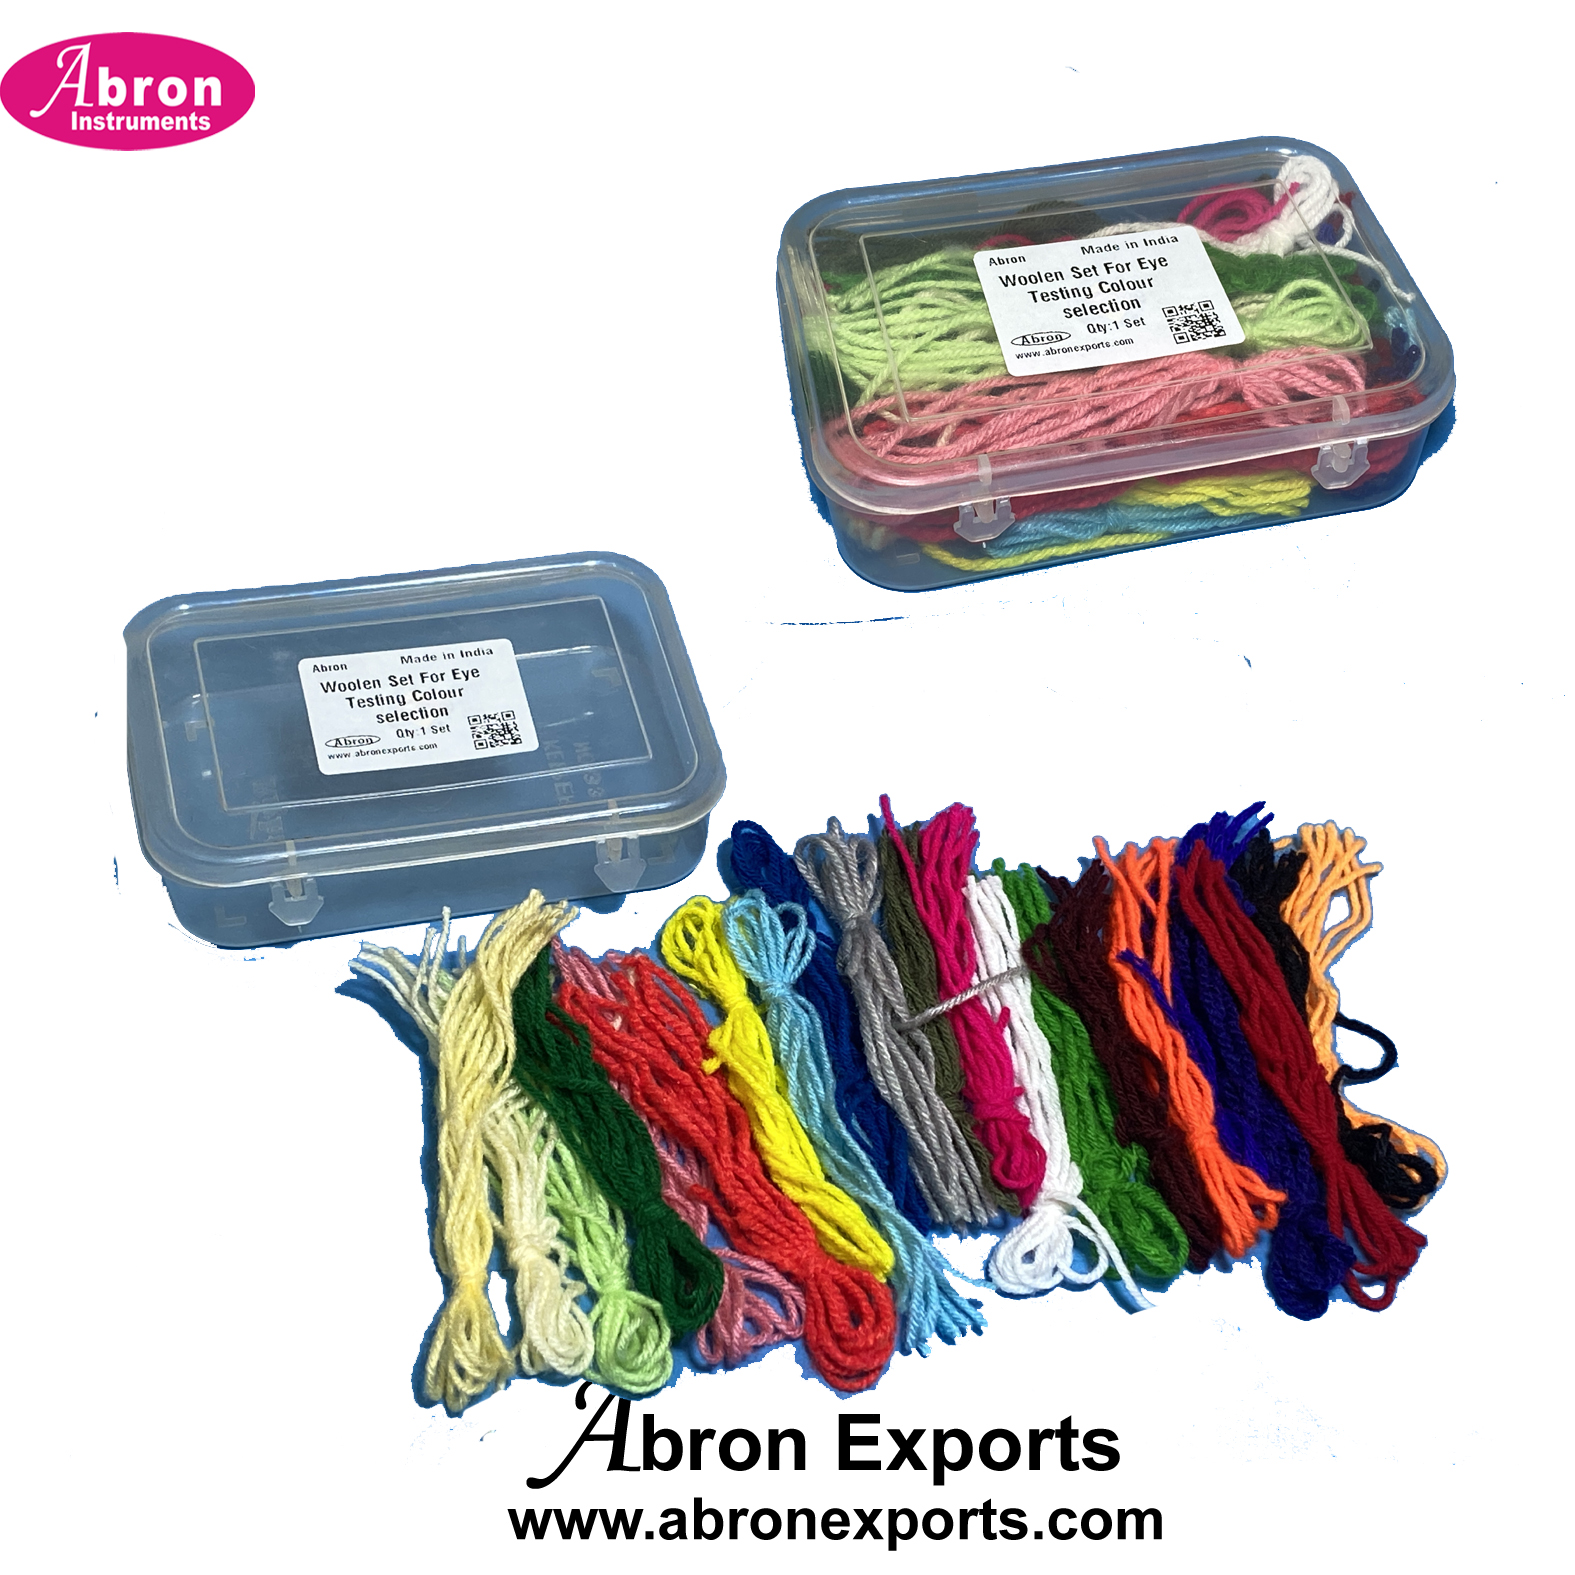 ENT Eye Testing Woolen Threads ser for colour deficiency Blindness wool set for colour blind test Abron ABM-1517W 